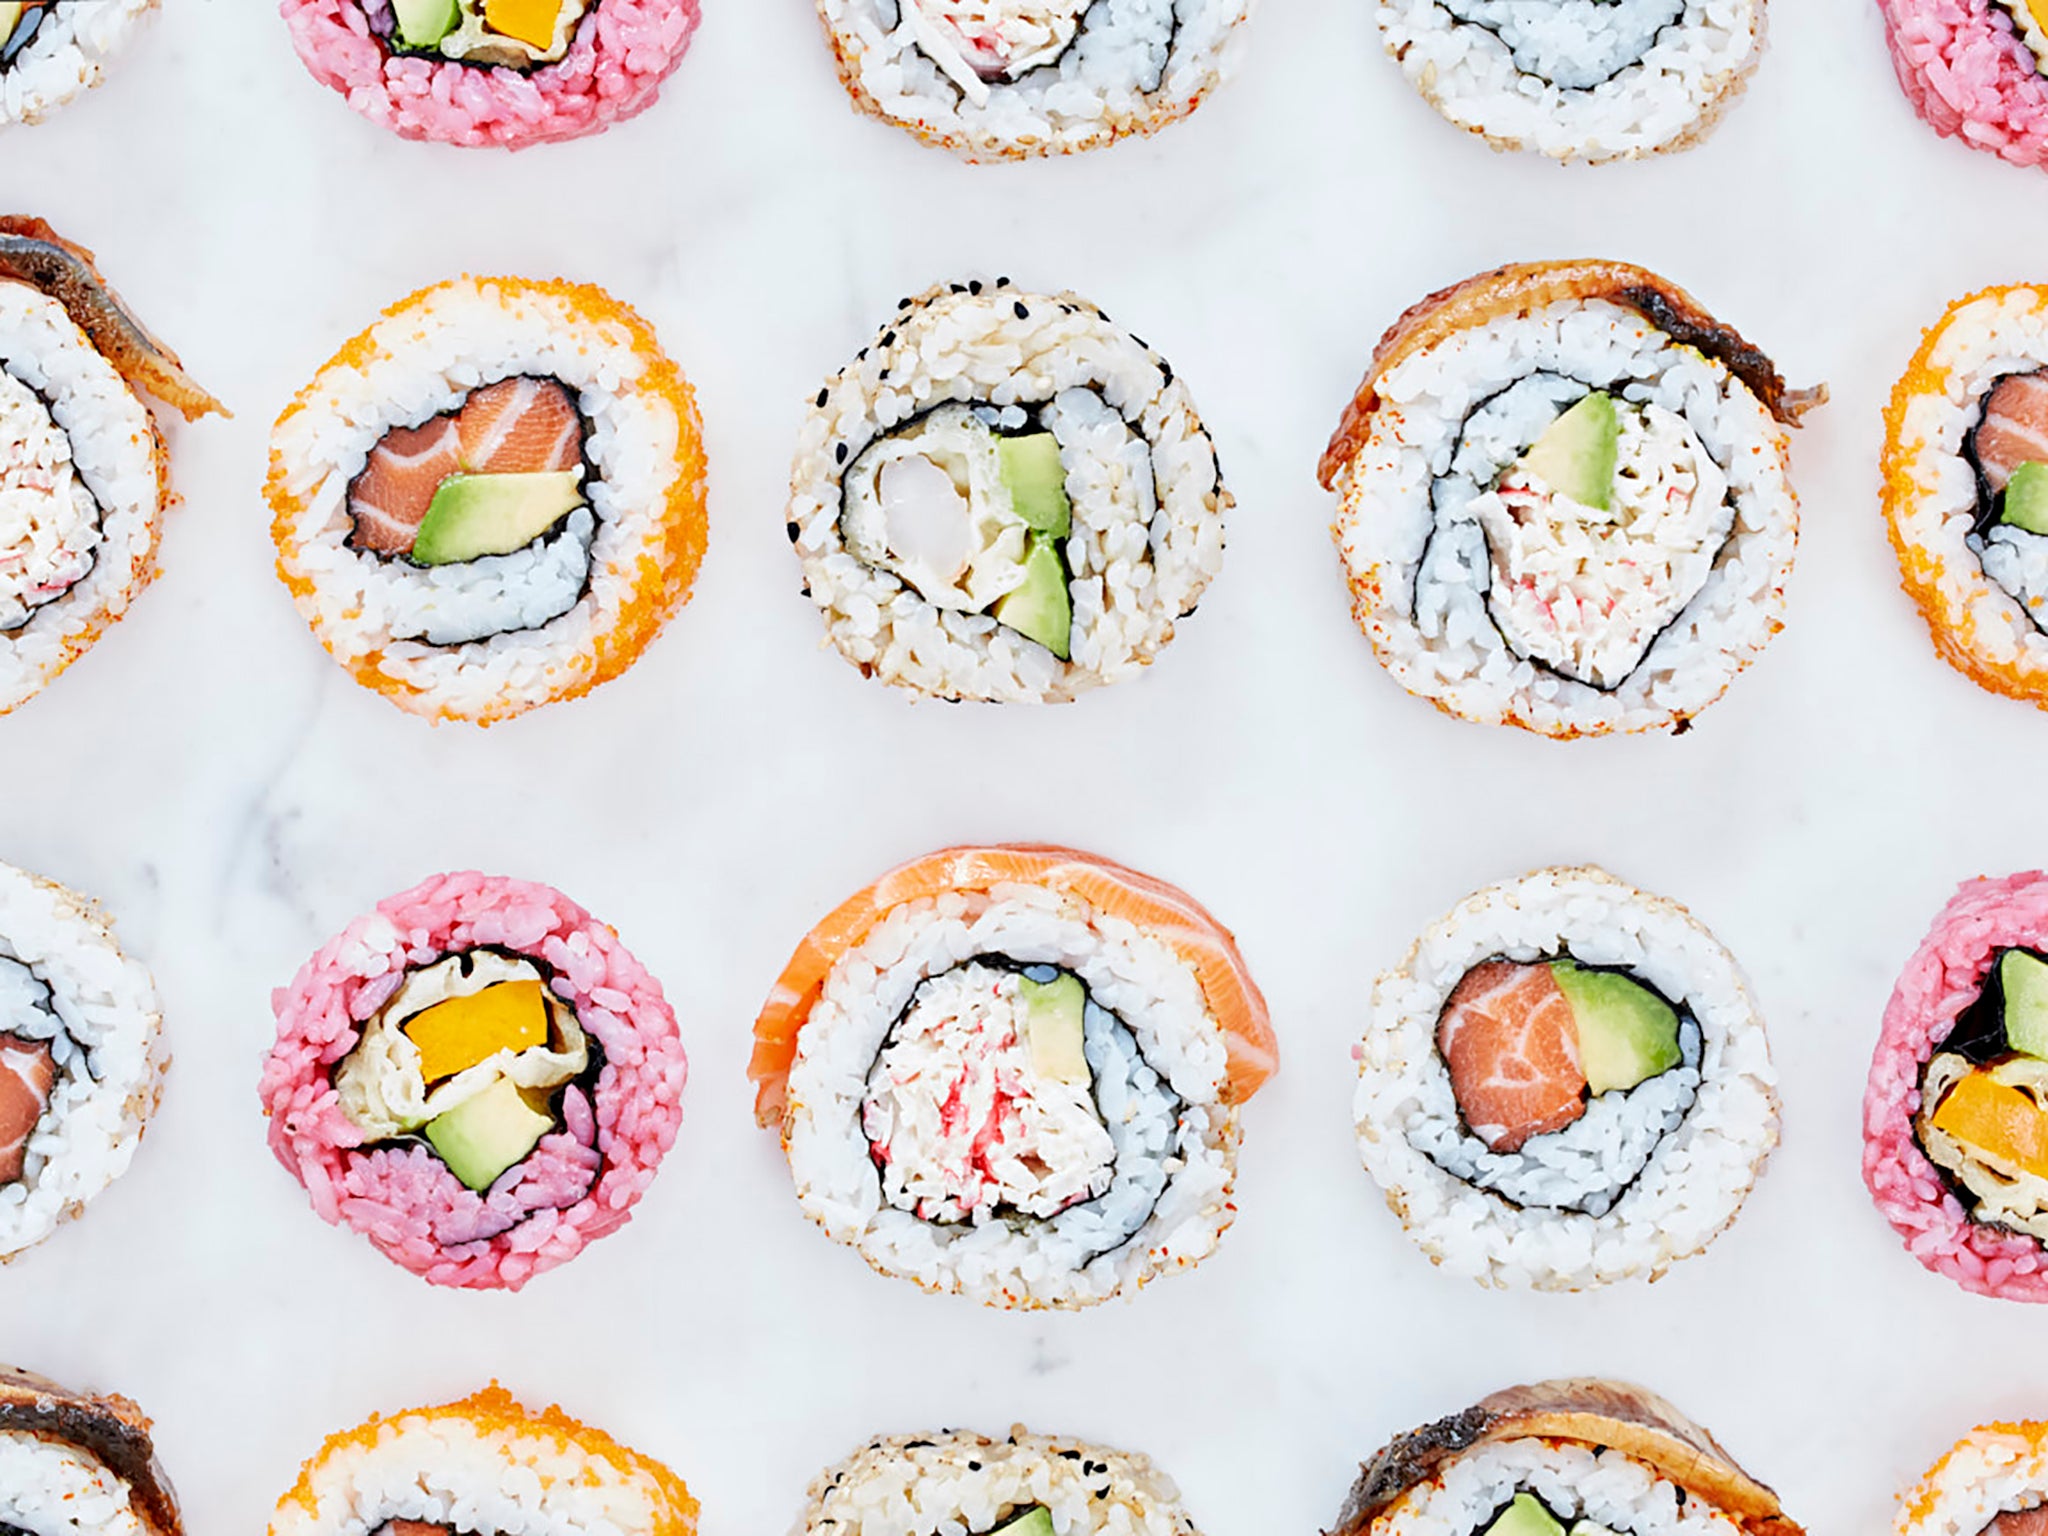 Easy Japanese recipes: Sushi, karaage, noodles and more